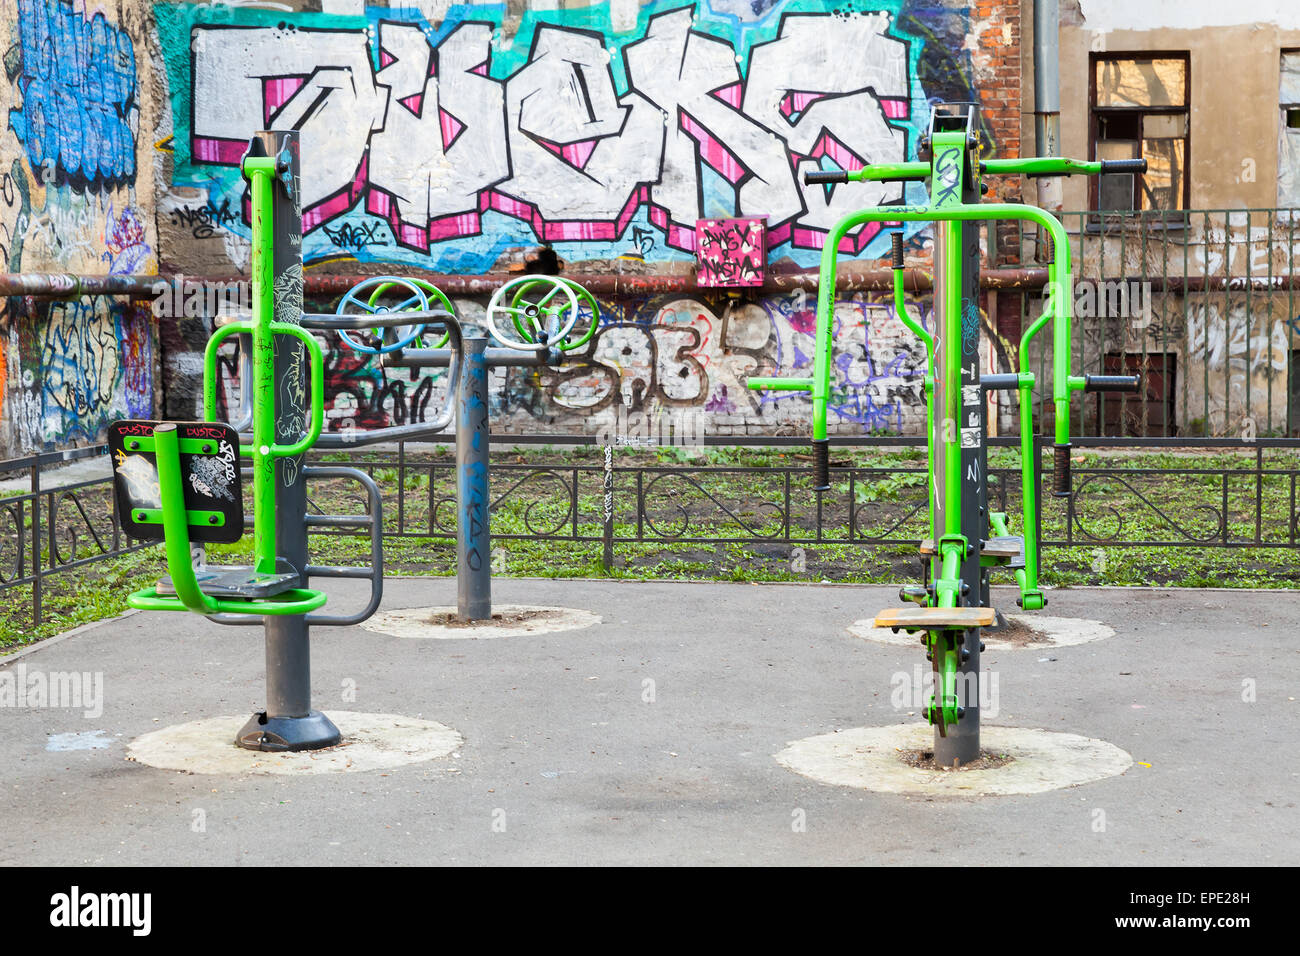 Saint-Petersburg, Russia - May 6, 2015: playground with outdoor fitness equipment and chaotic graffiti on old urban walls Stock Photo